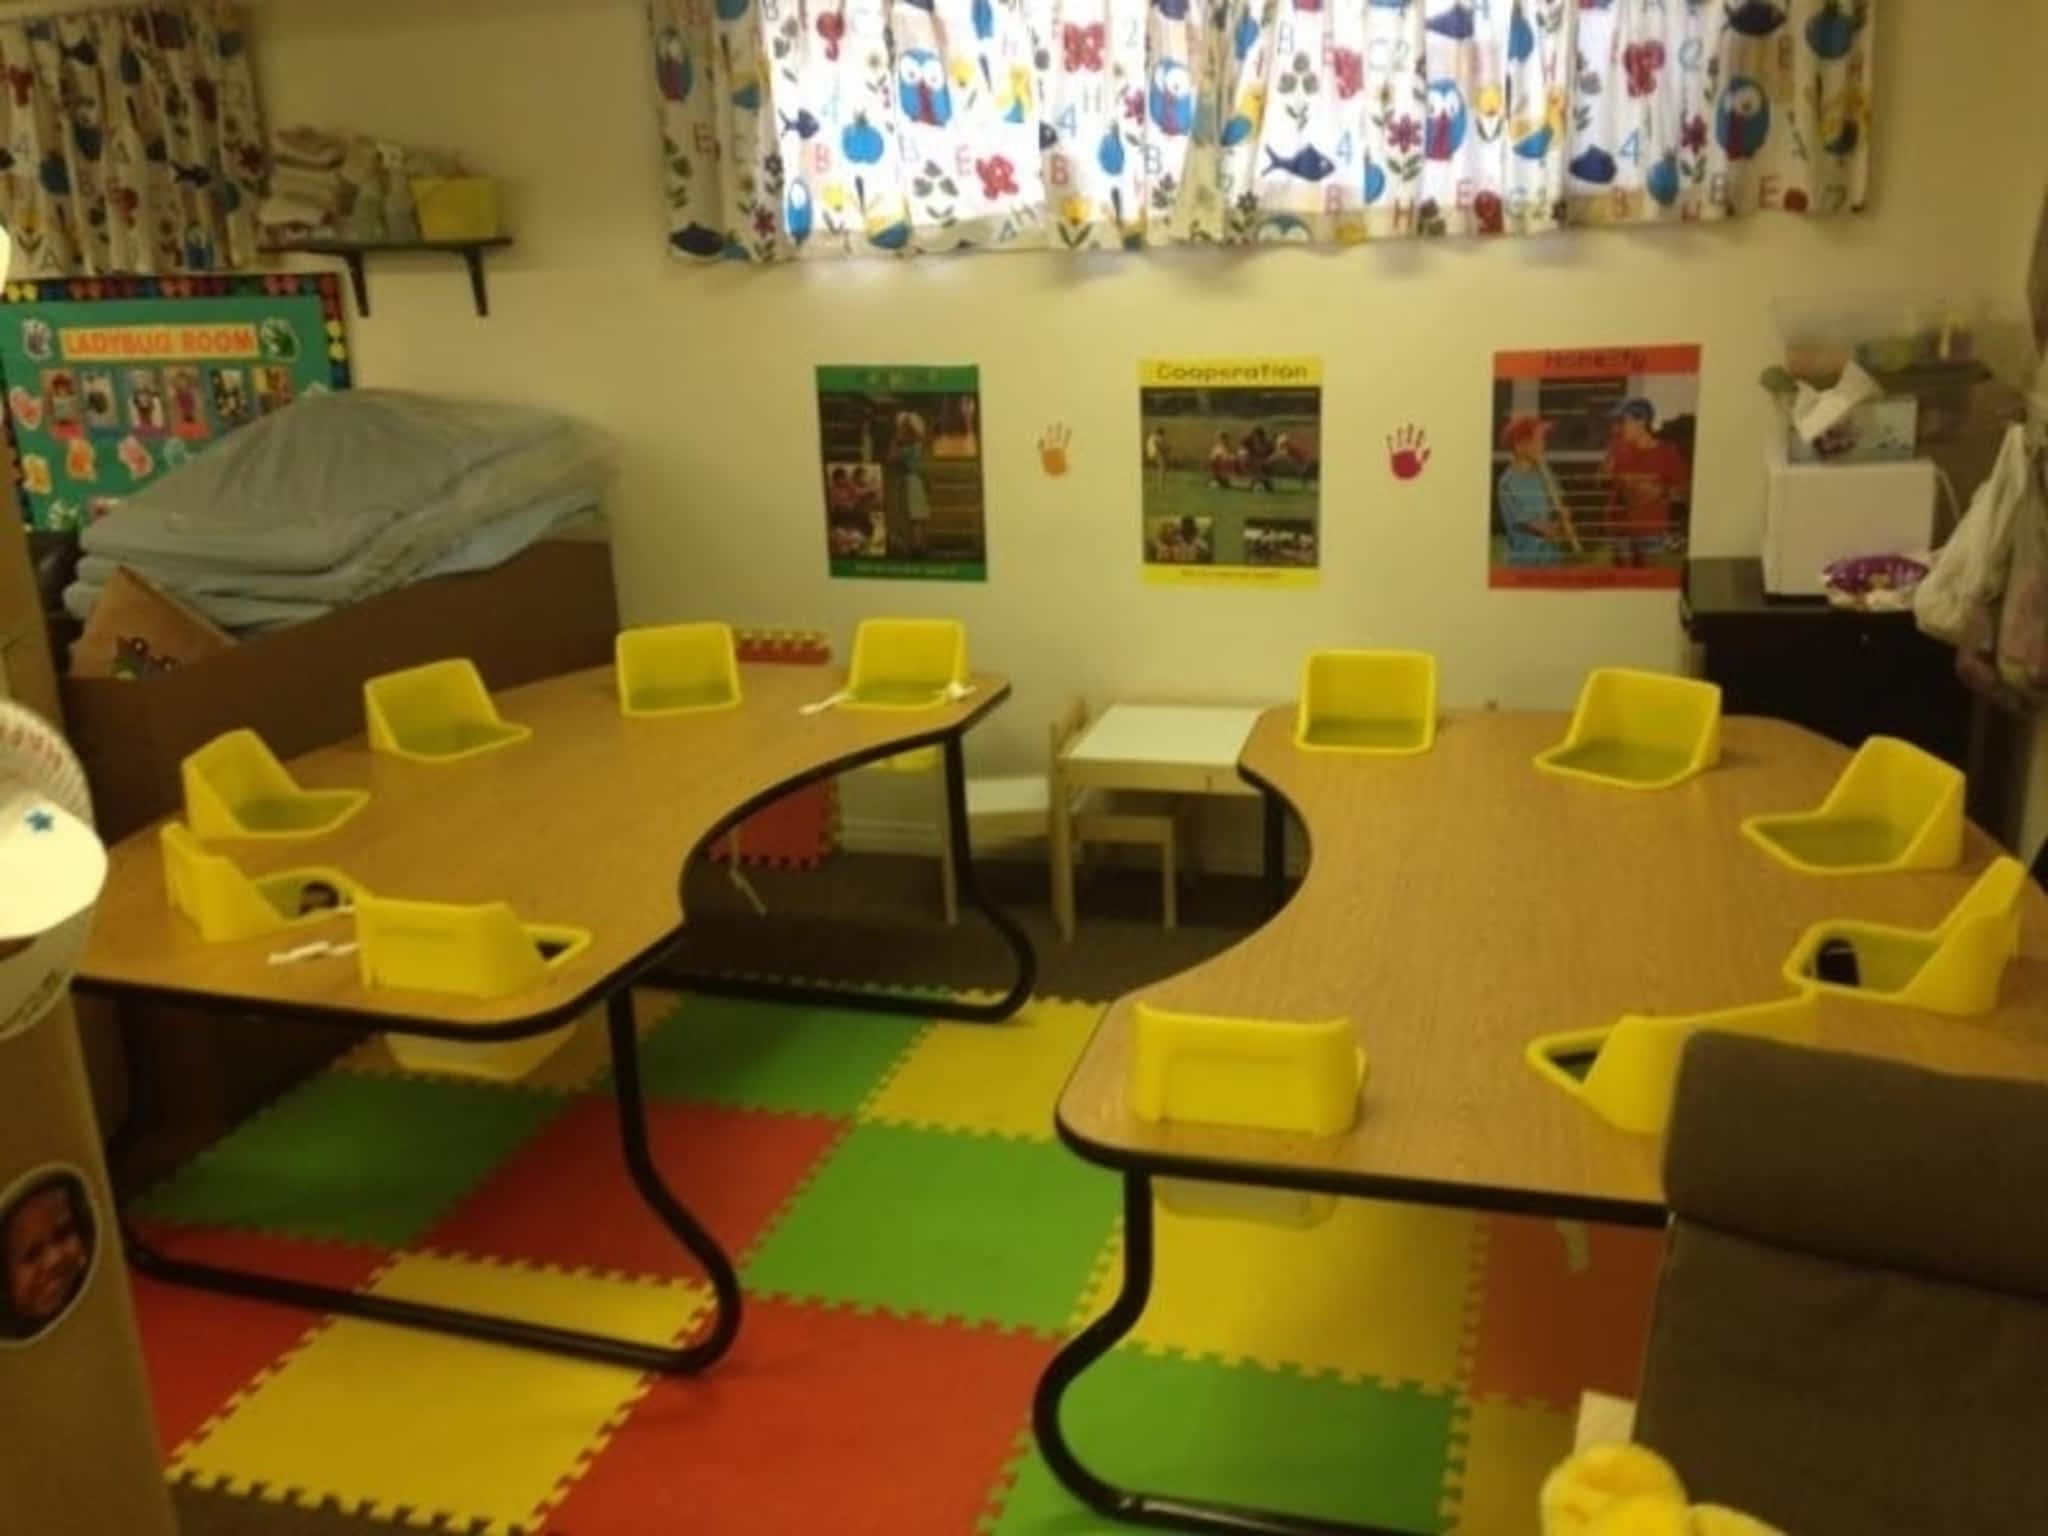 photo Helping Hands Early Learning Daycare